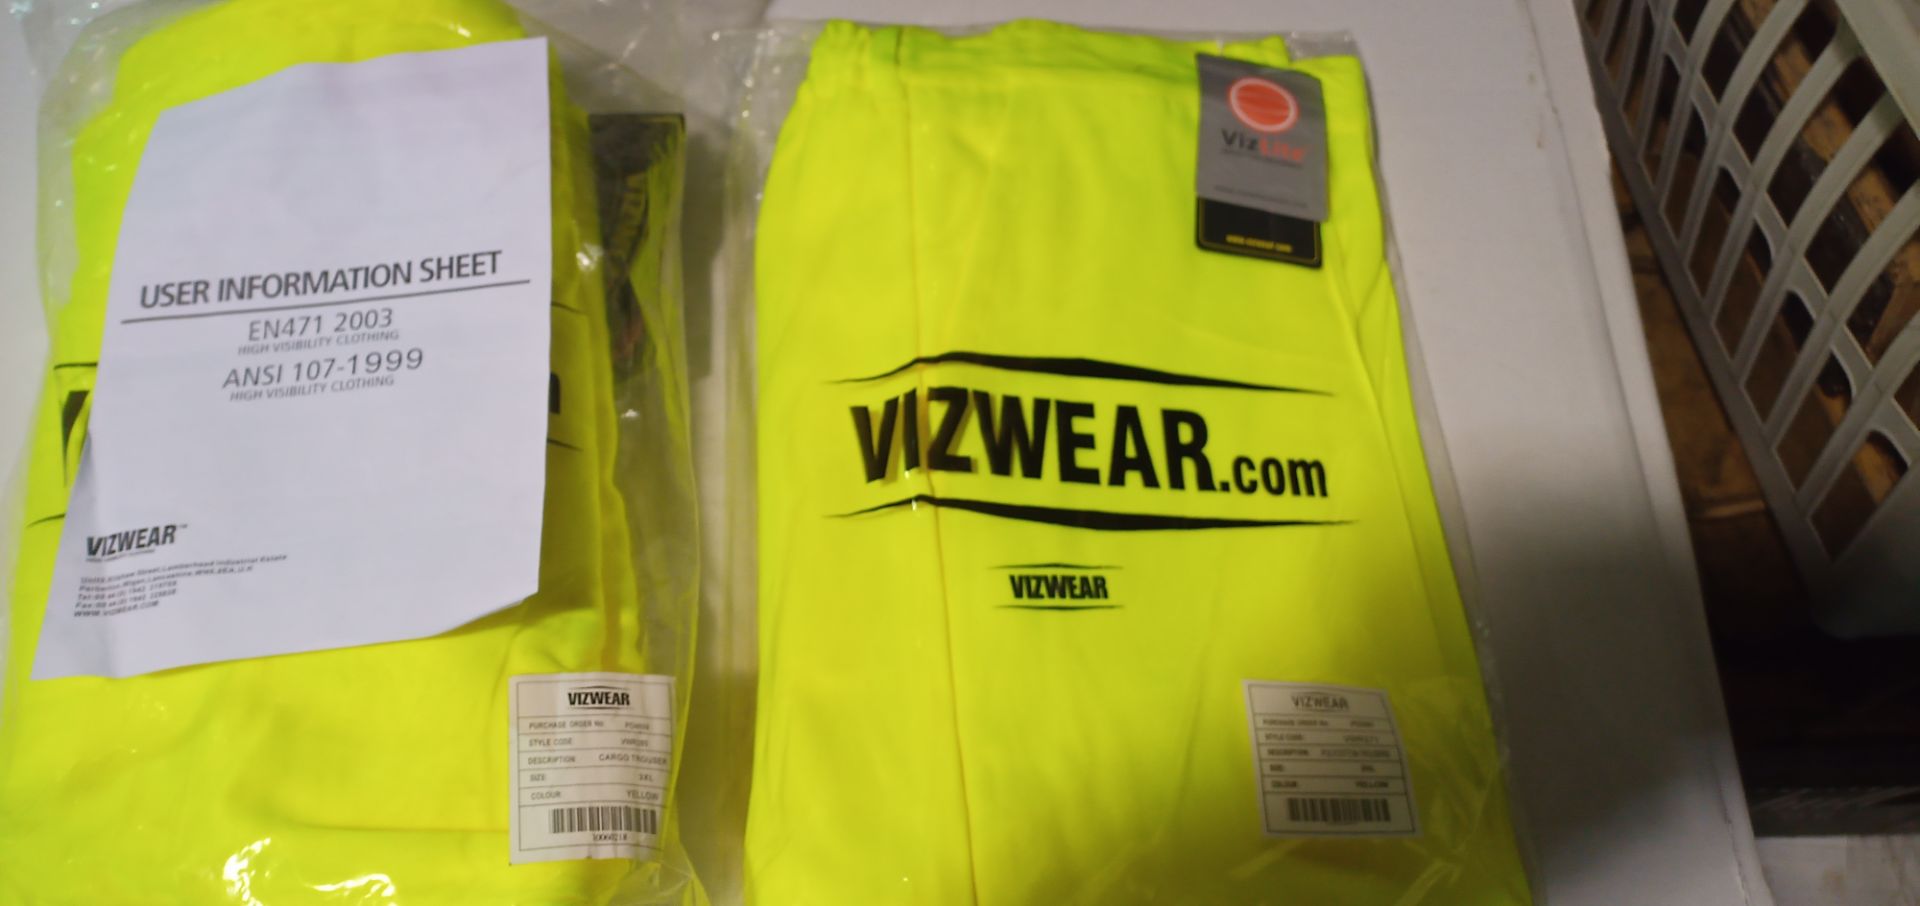 25x BRAND NEW SEALED CARTONS, SIZE 2XL CARGO TROUSERS ARE VIZWEAR BRAND *PLUS VAT* - Image 2 of 8